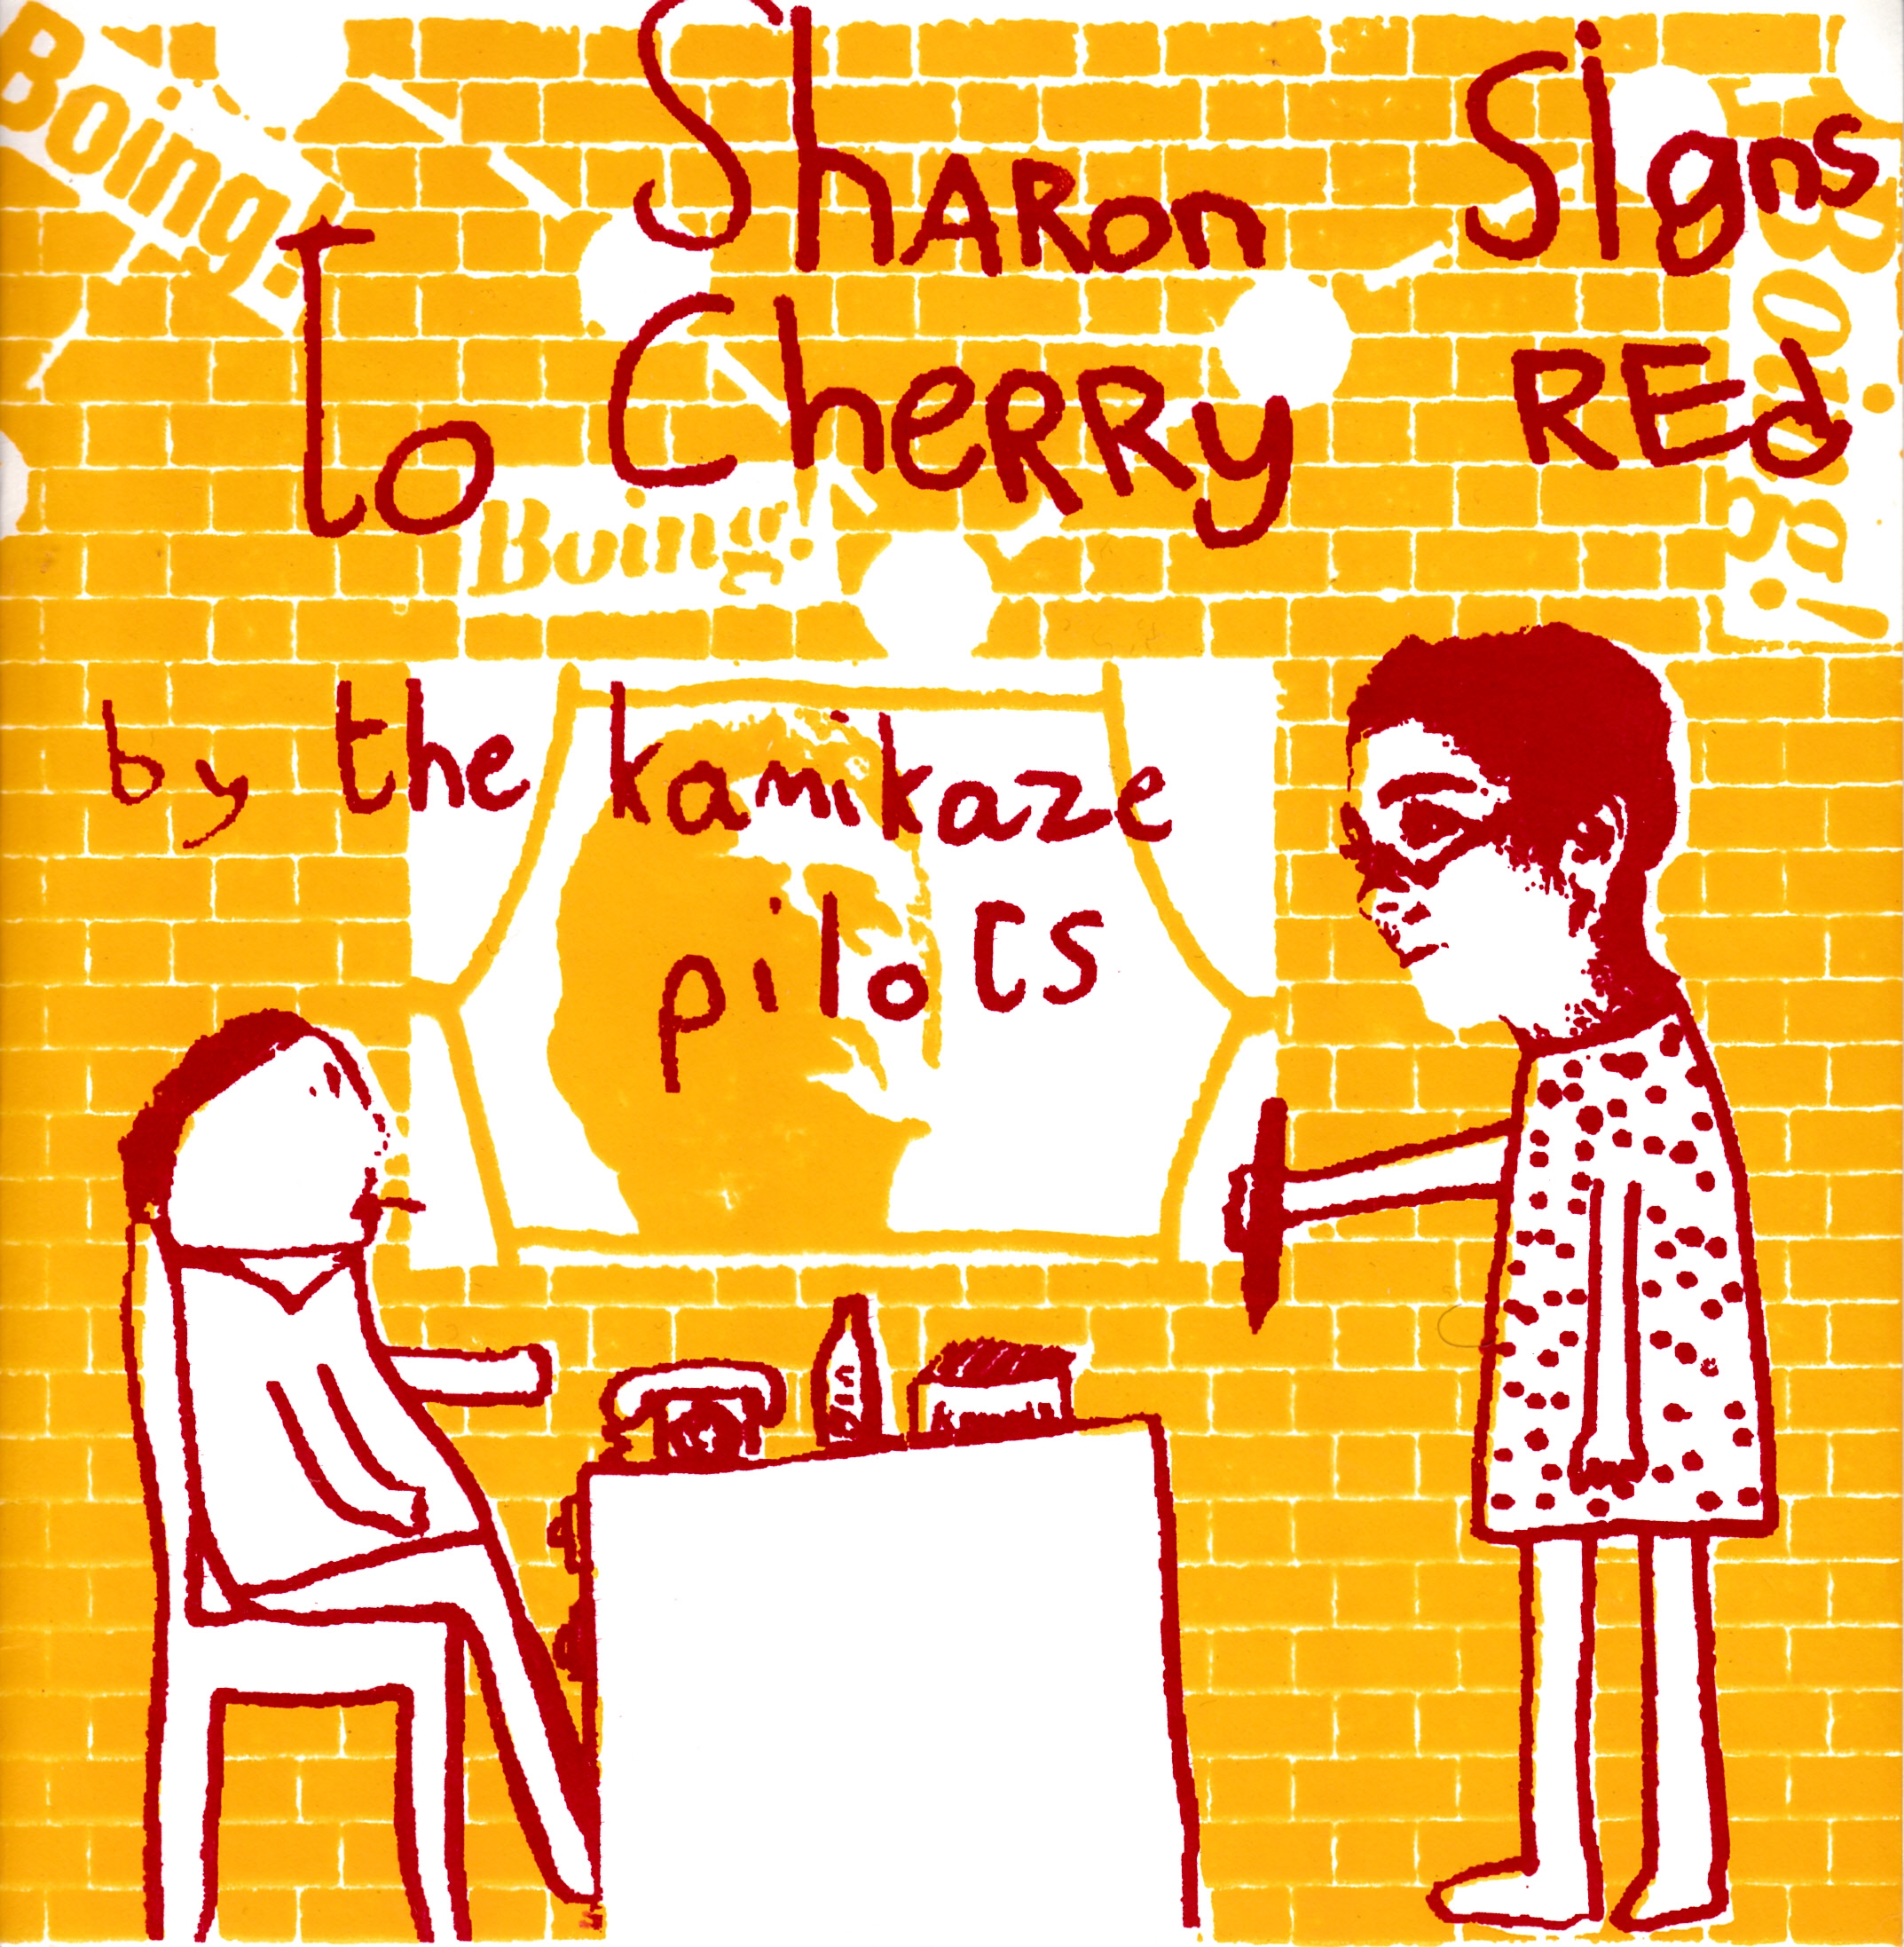 SHARON SIGNS TO CHERRY RED